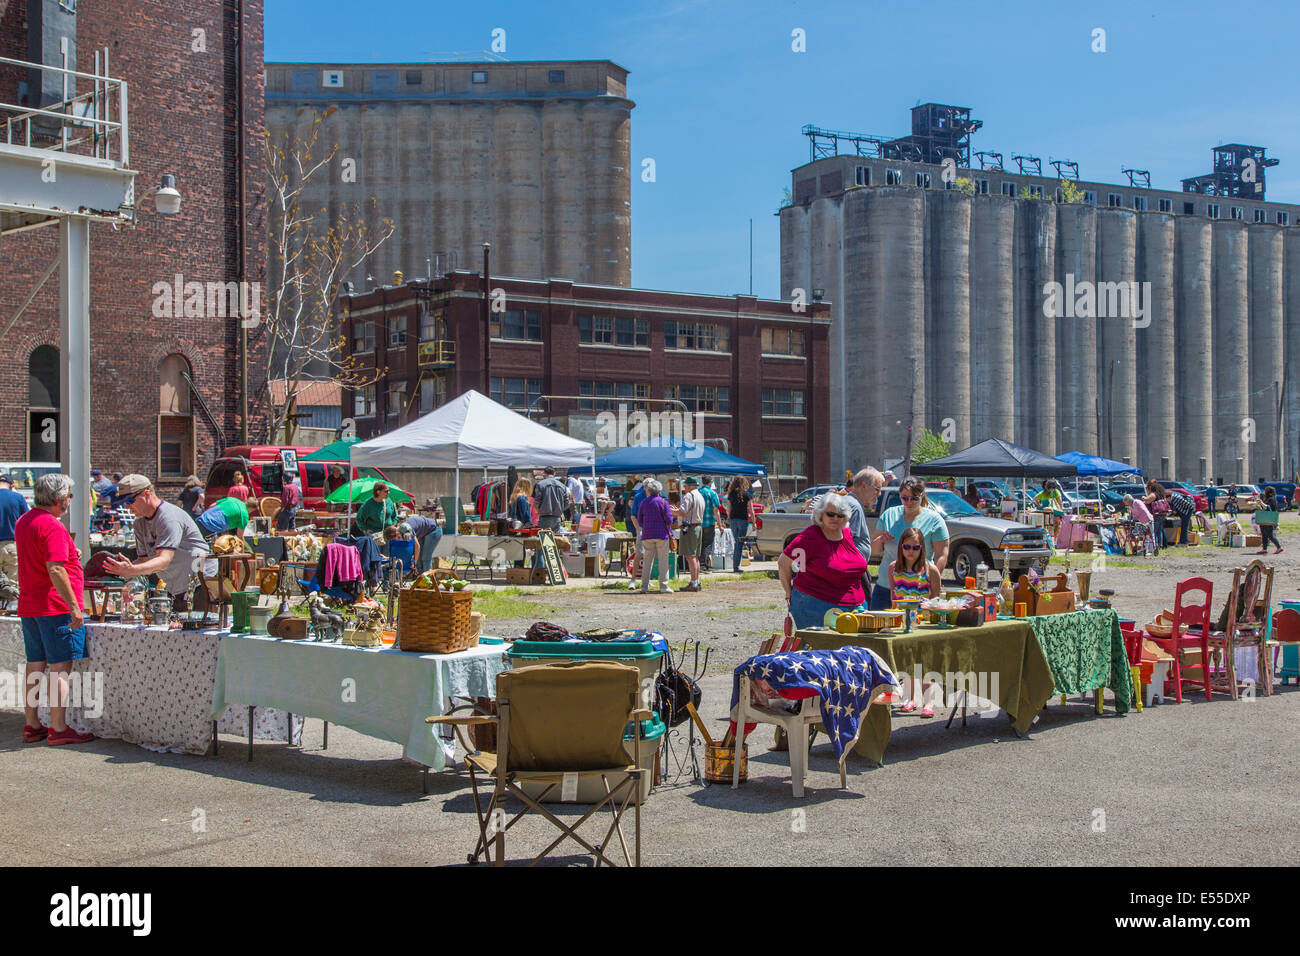 Flea Market at historic abandoned grain elevators on the waterfront in Buffalo, New York now know as Silo City. Stock Photo